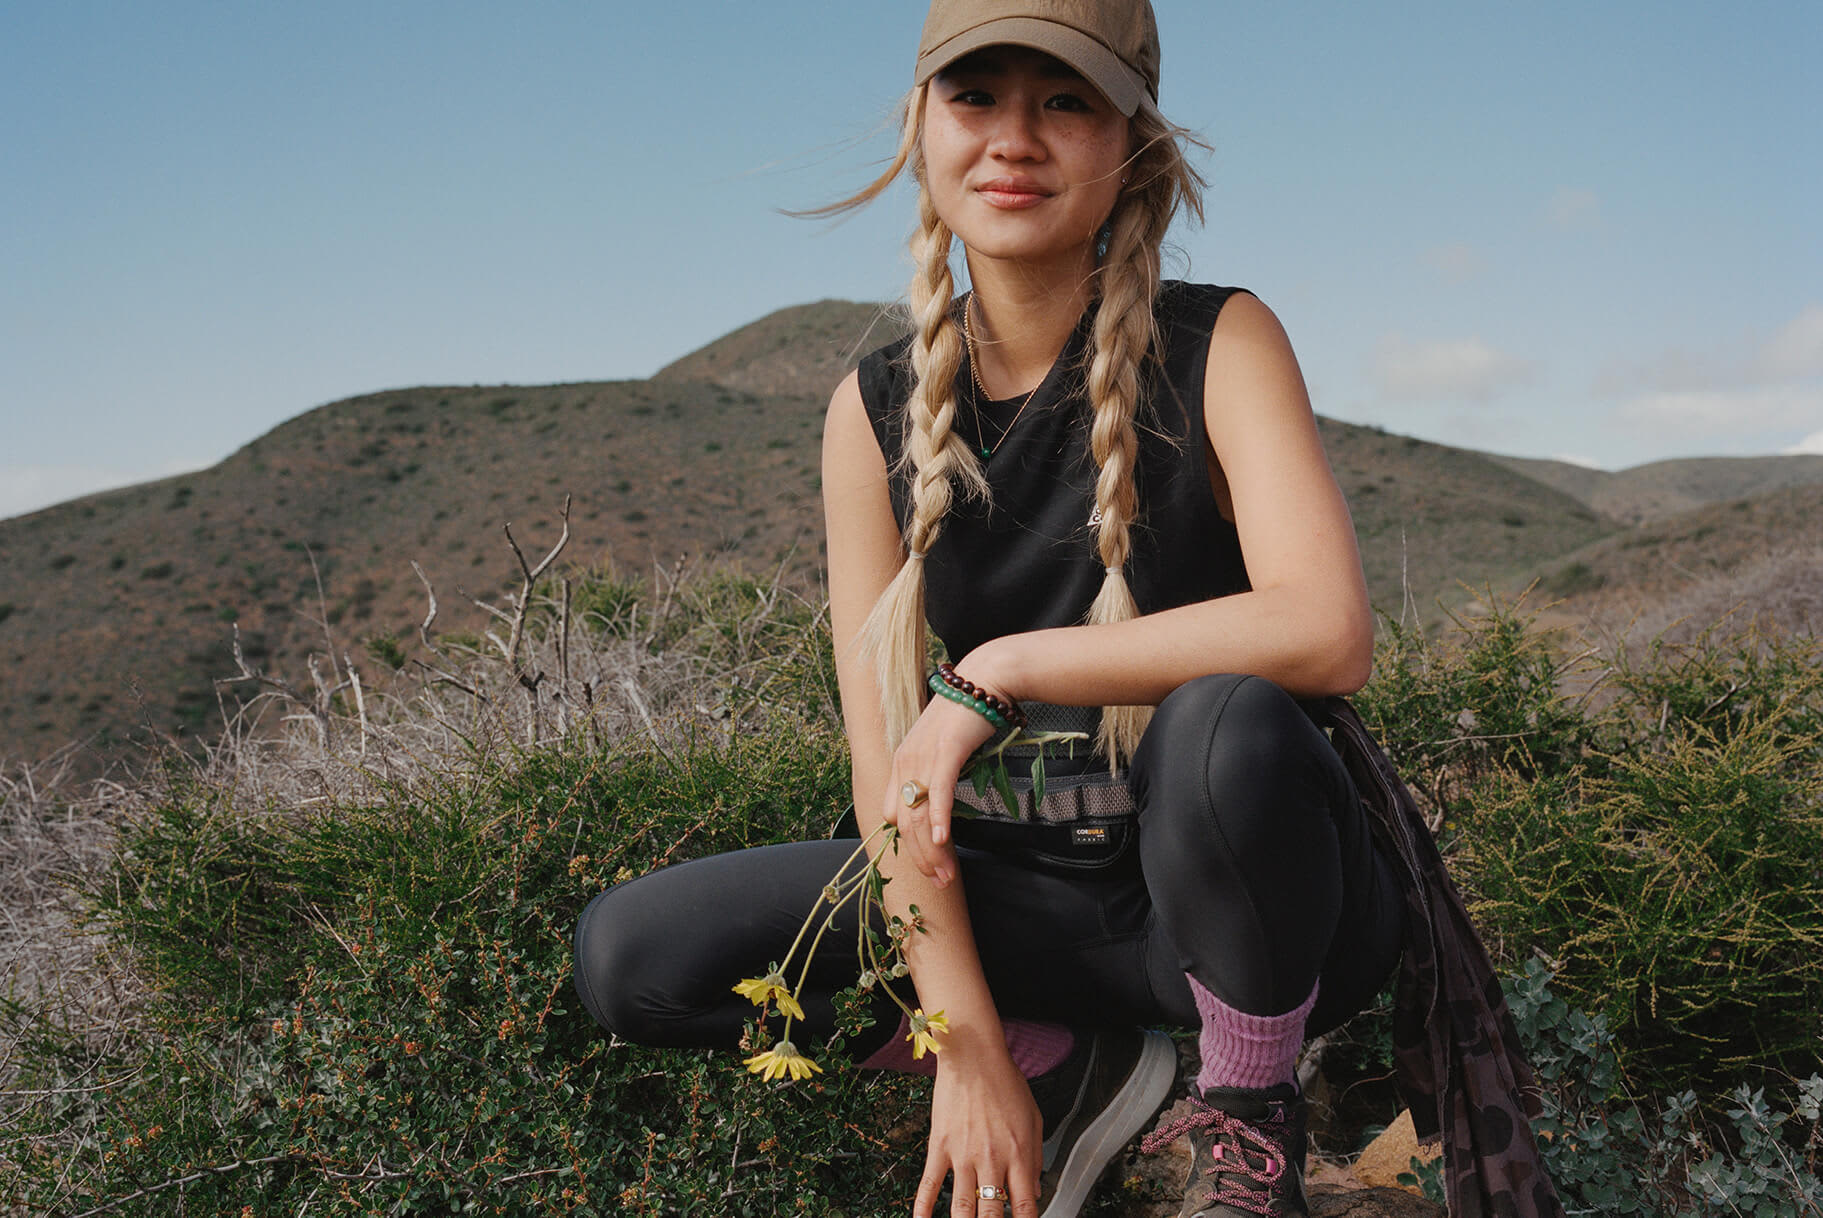 How To Pick the Best Women’s Leggings for a Hike